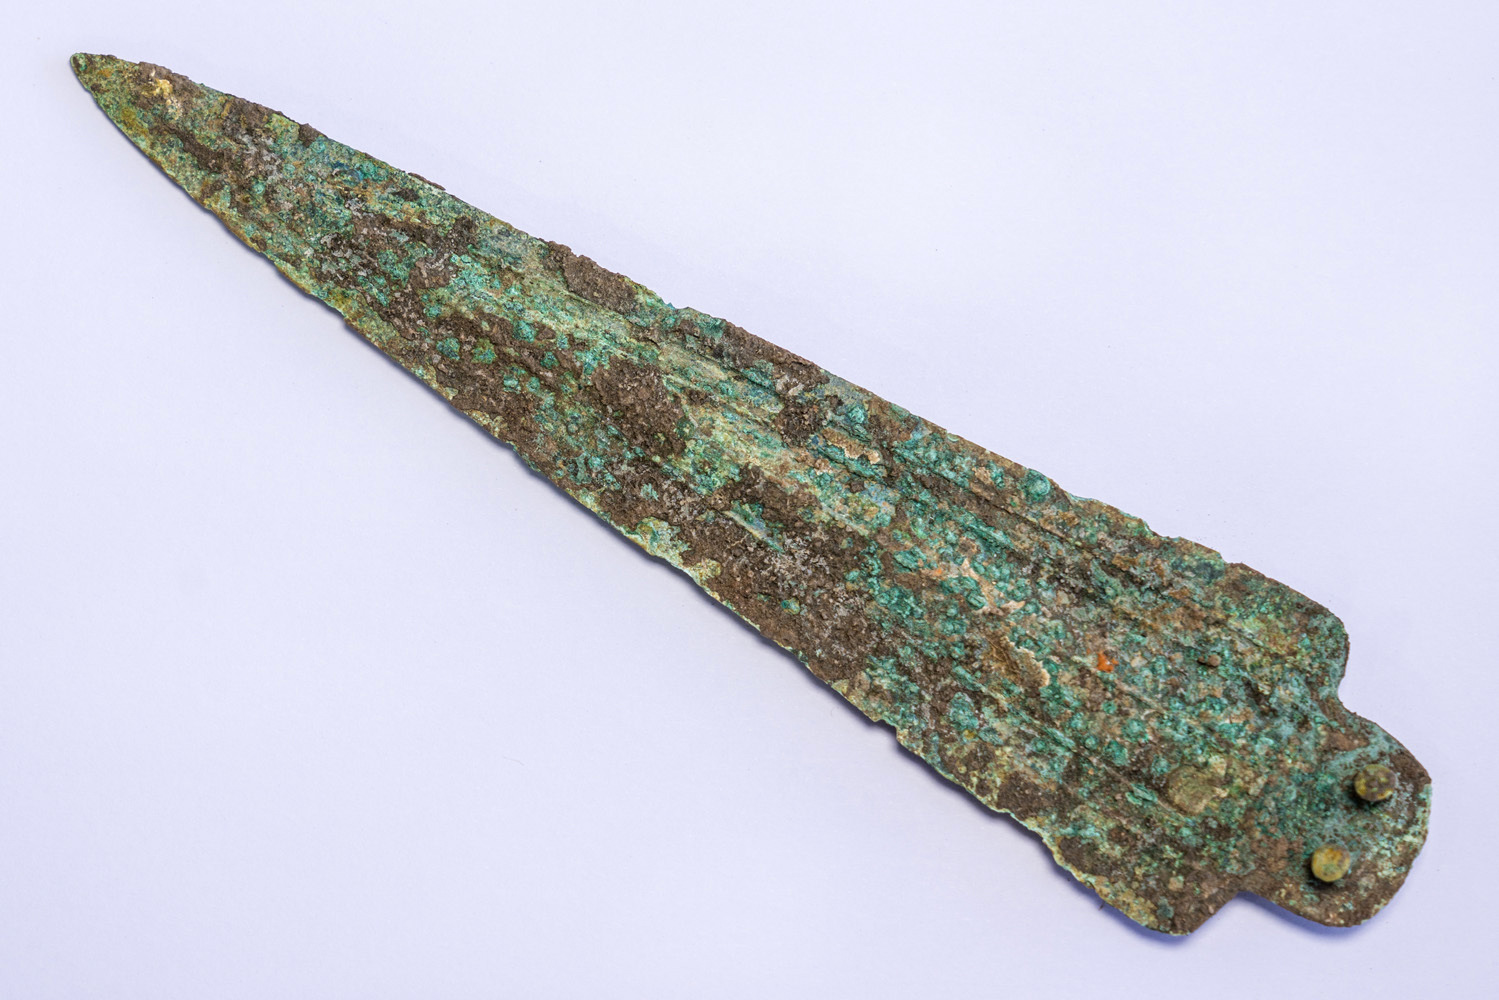 Spearhead dated to the middle bronze period, buried as burial offering in a warrior's tomb. 